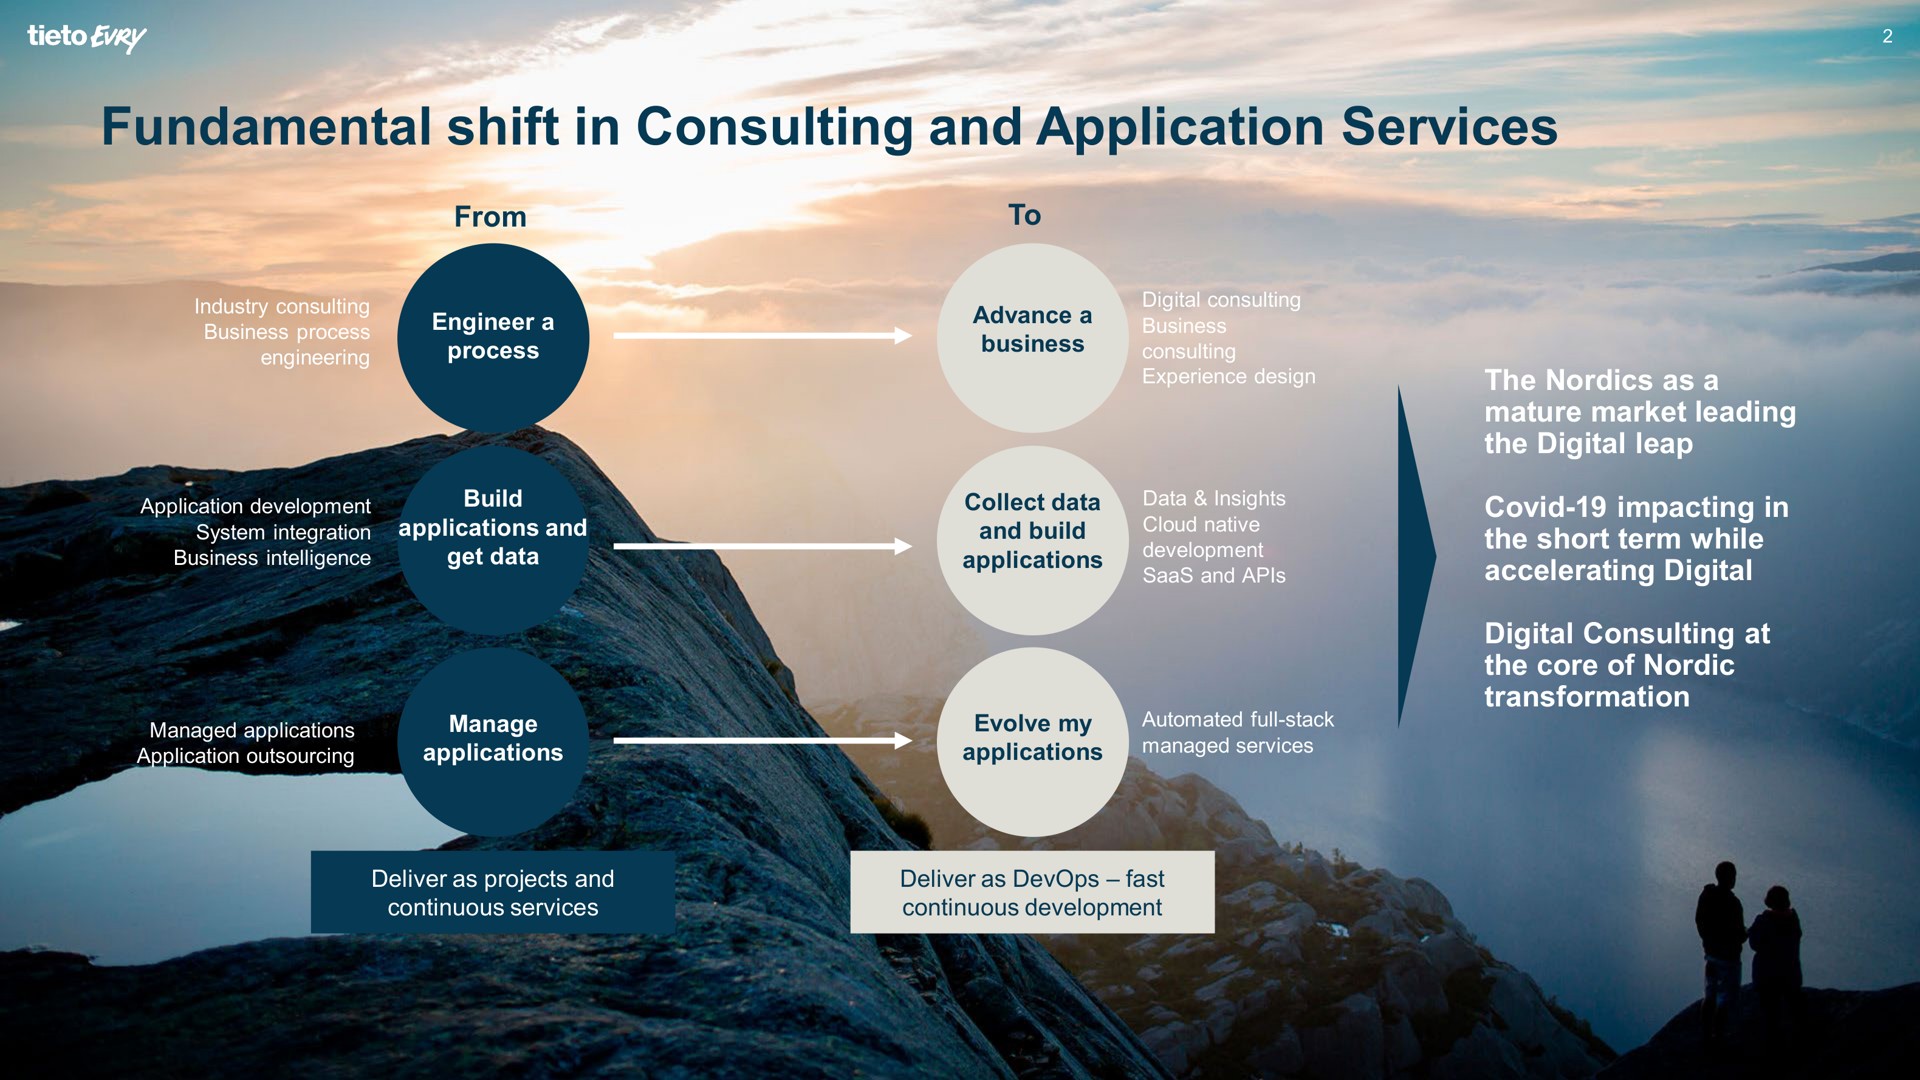 fundamental shift in consulting and application services | Tietoevry